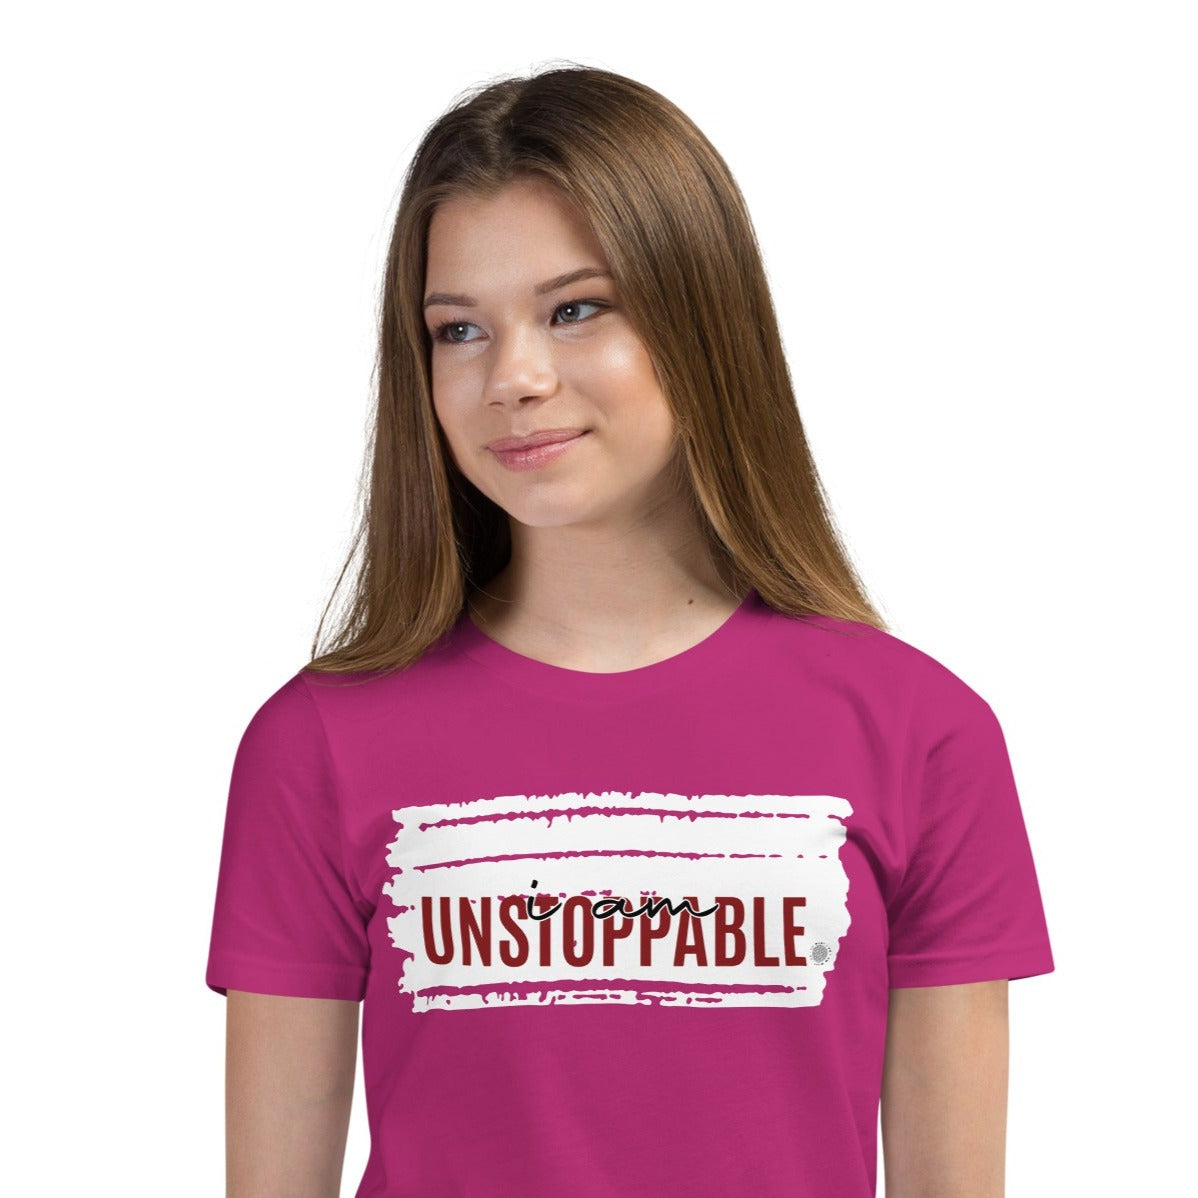 I Am Unstoppable Youth T-Shirt berry